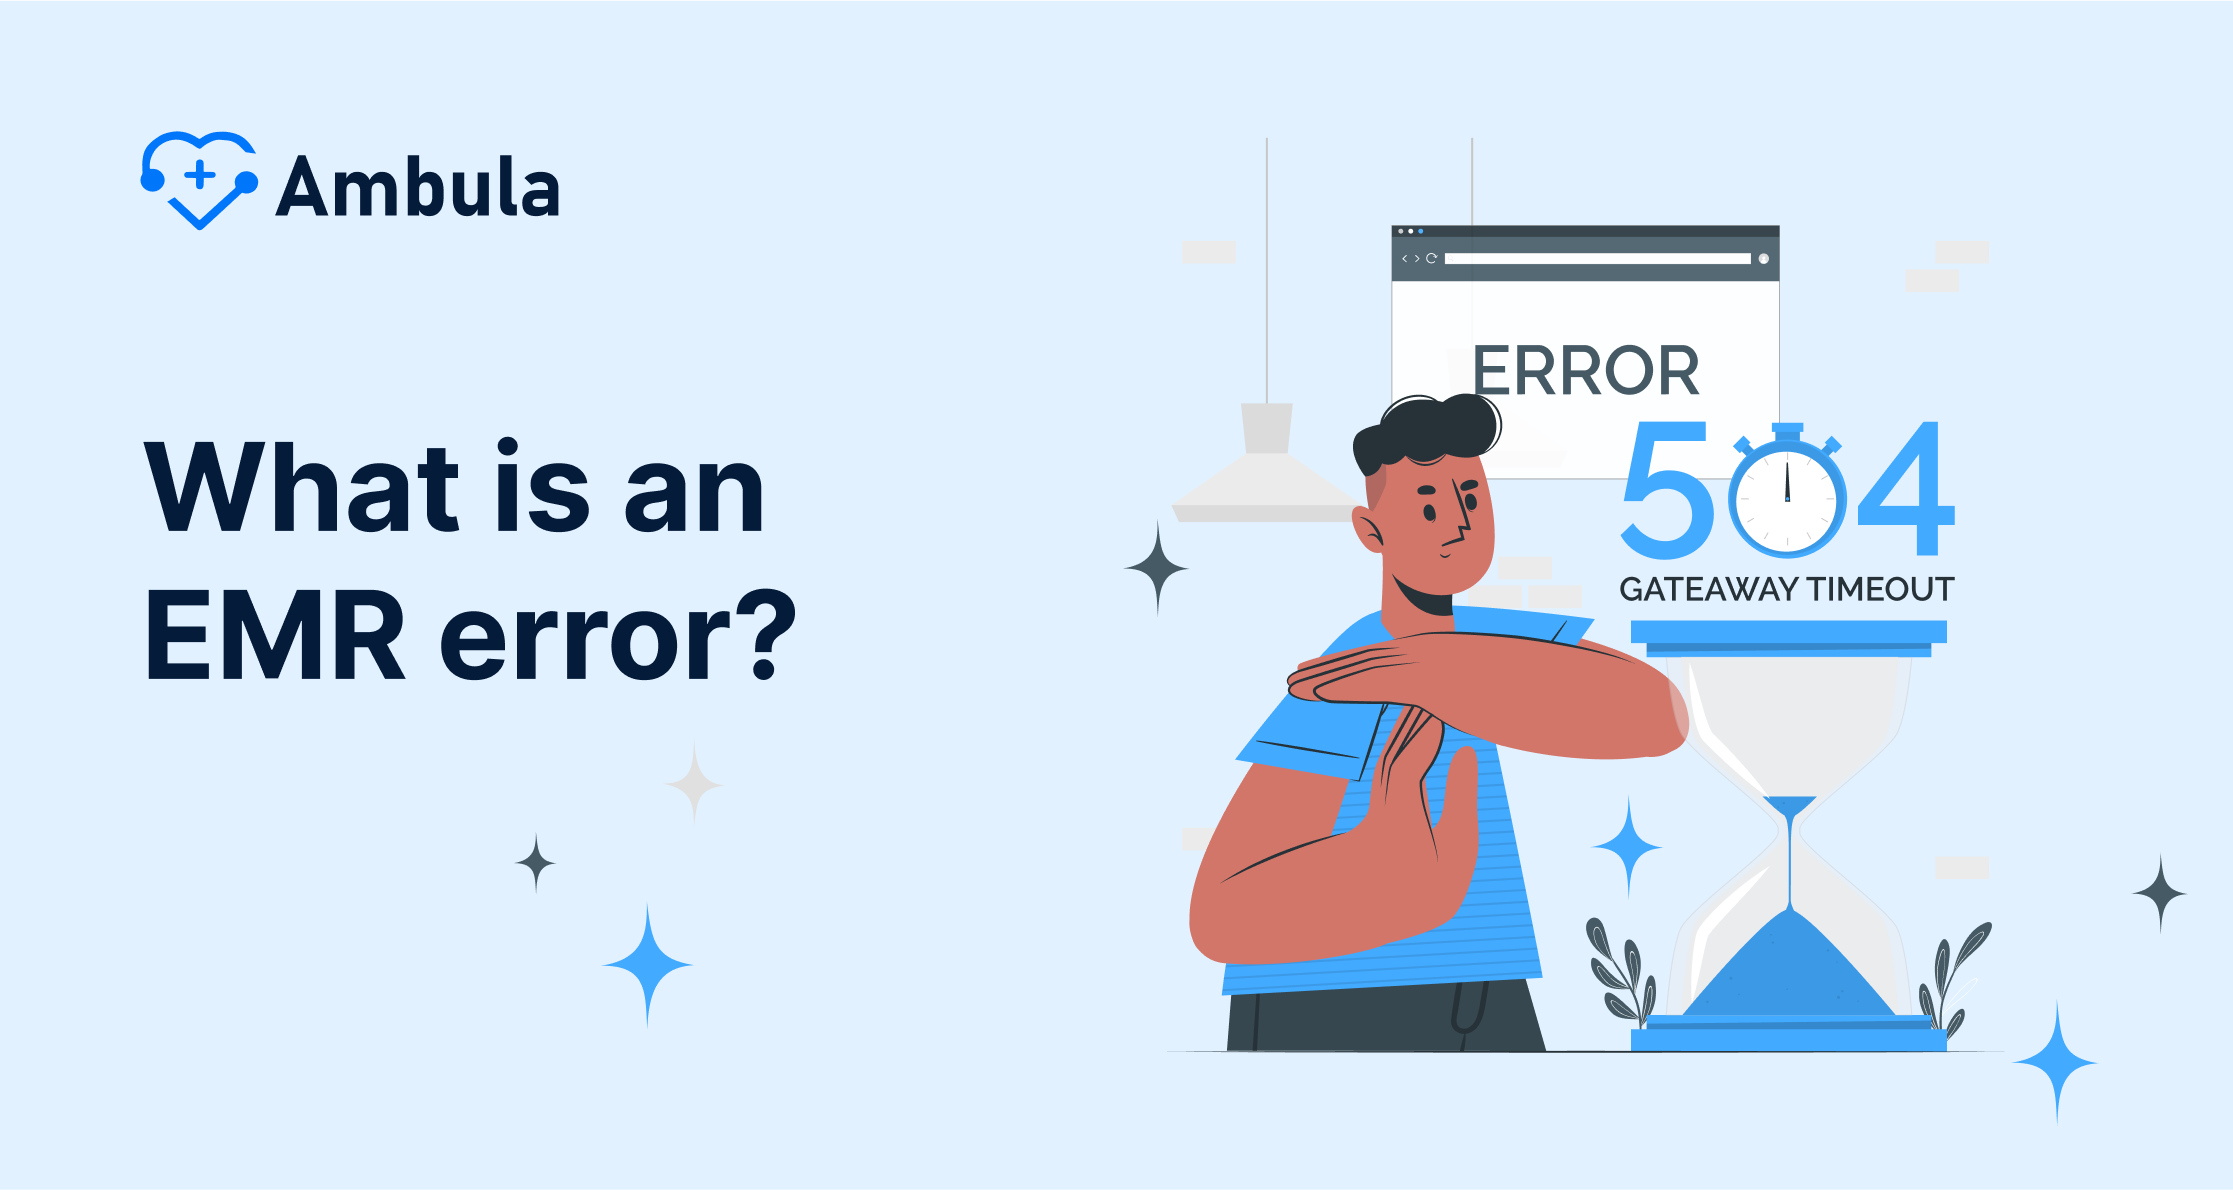 What is an EMR error?